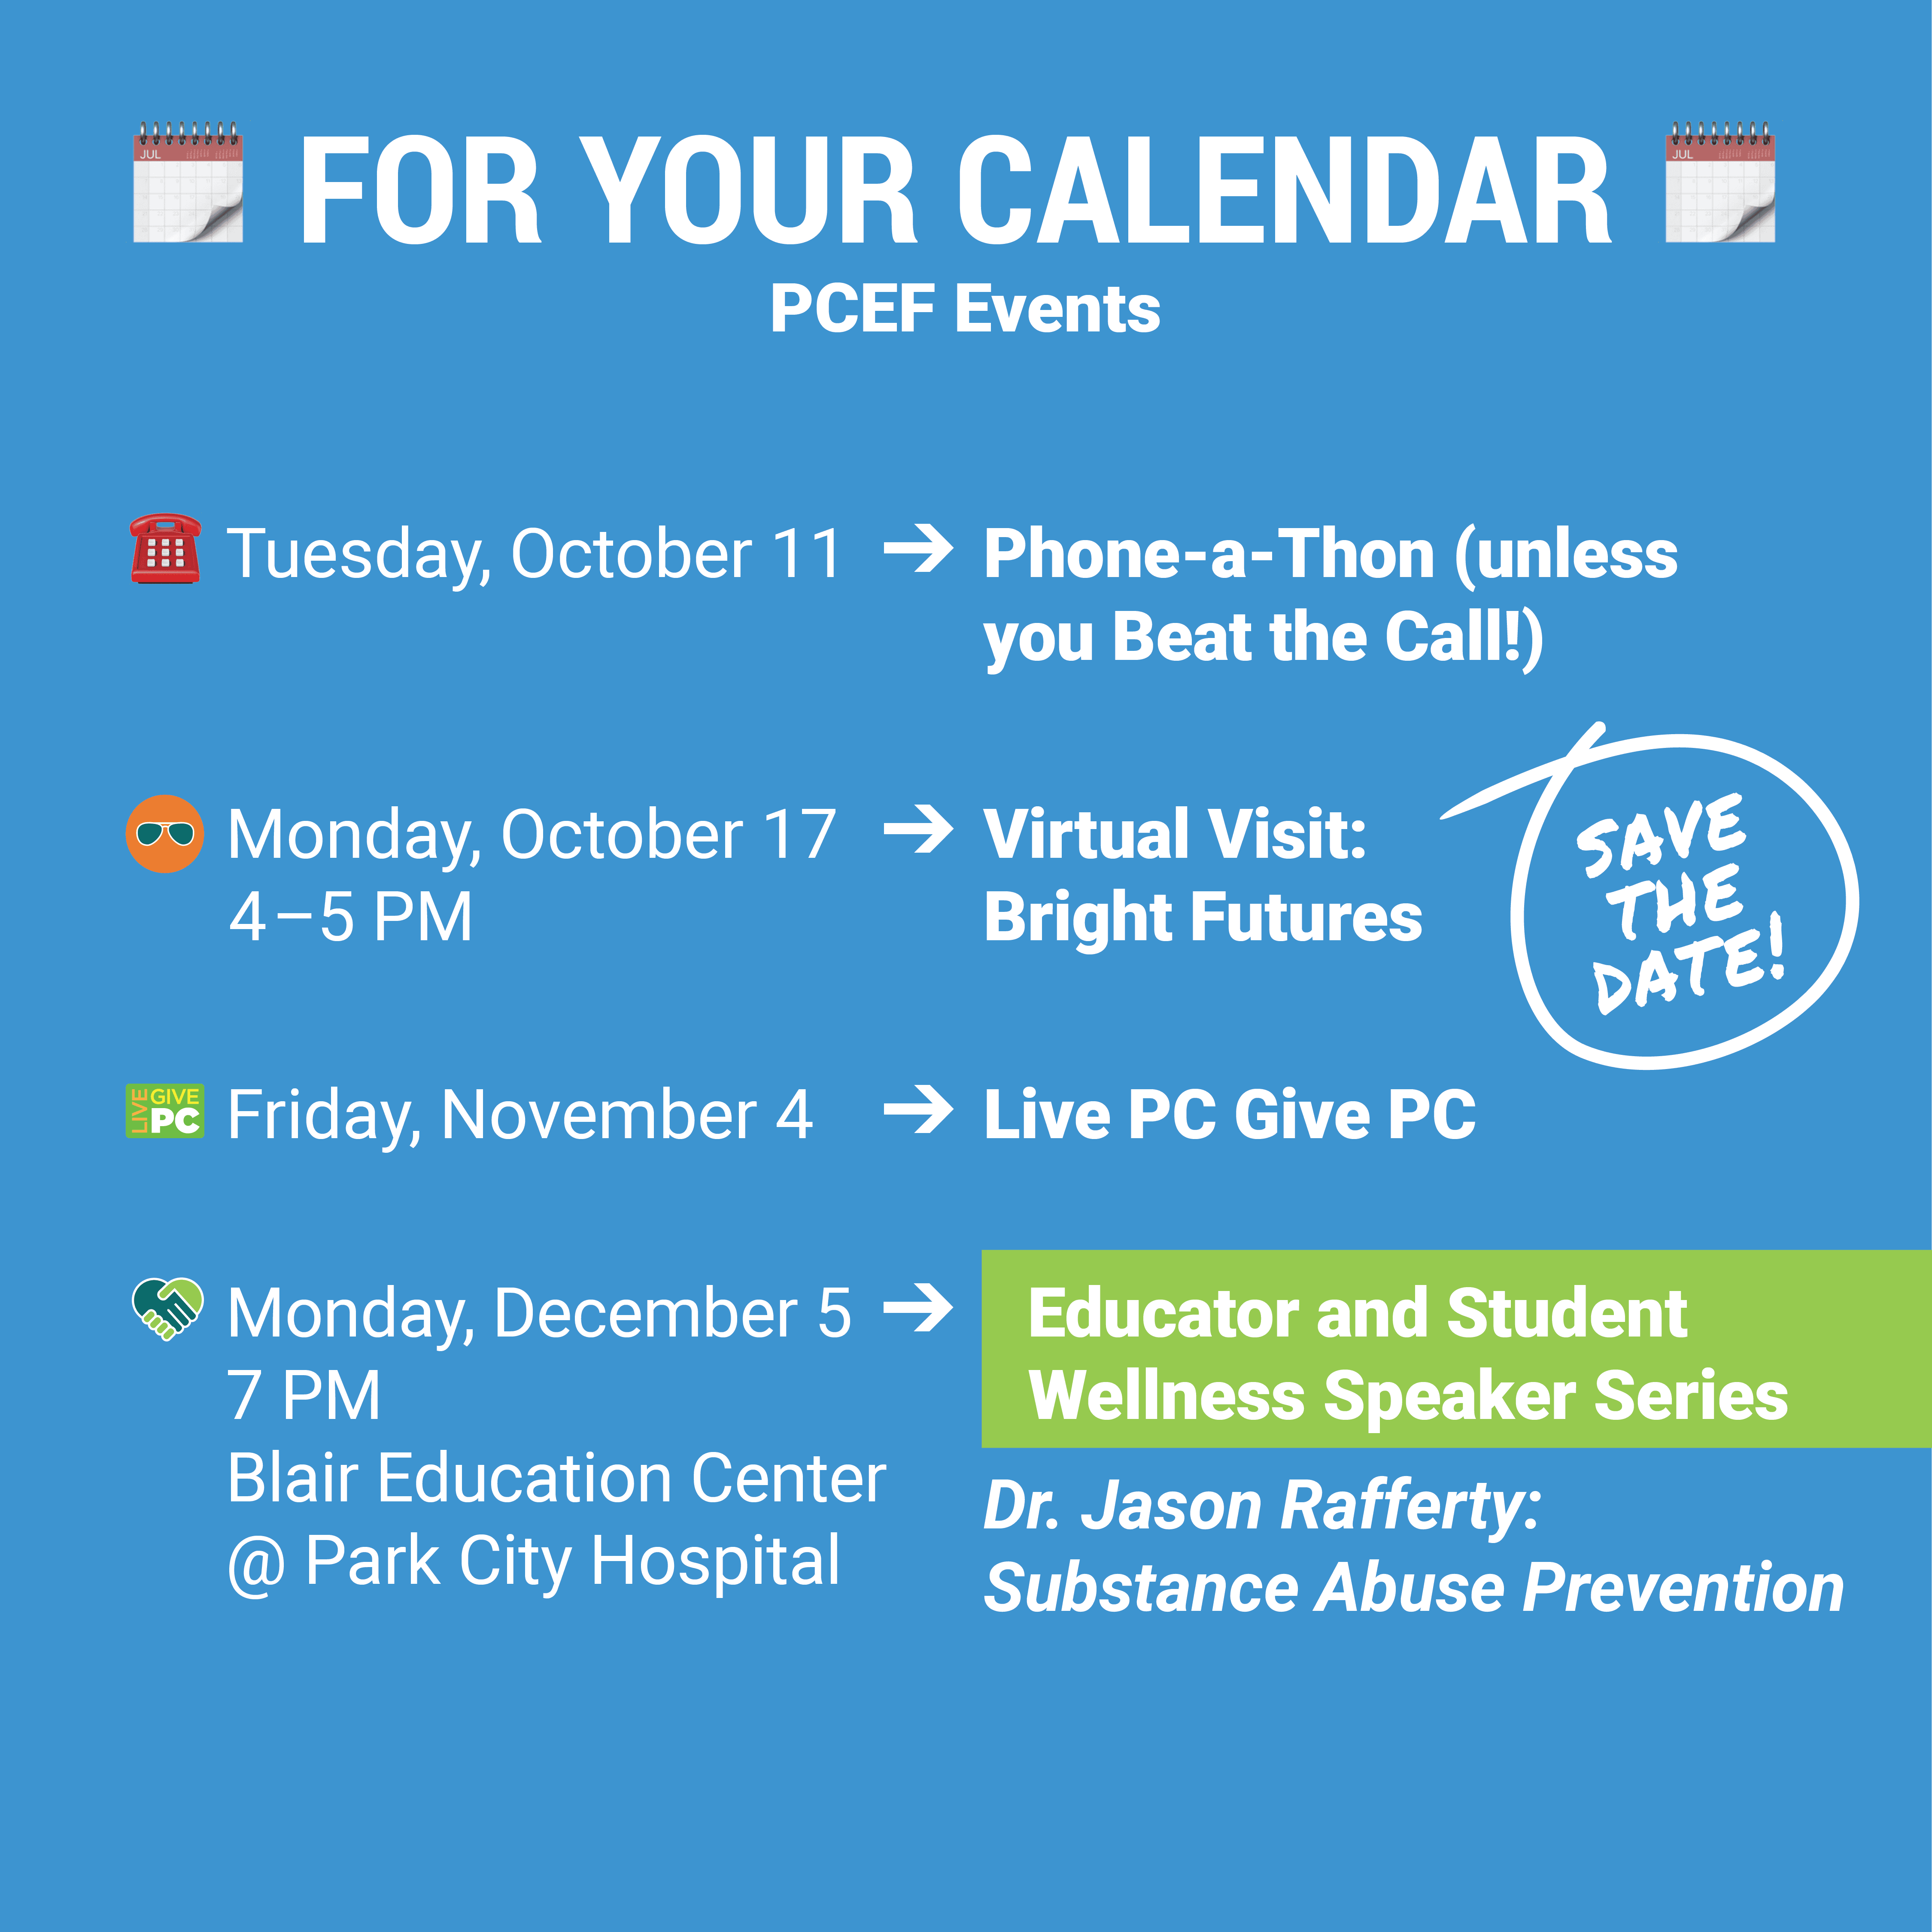 For Your Calendar → Upcoming 2022 PCEF Events